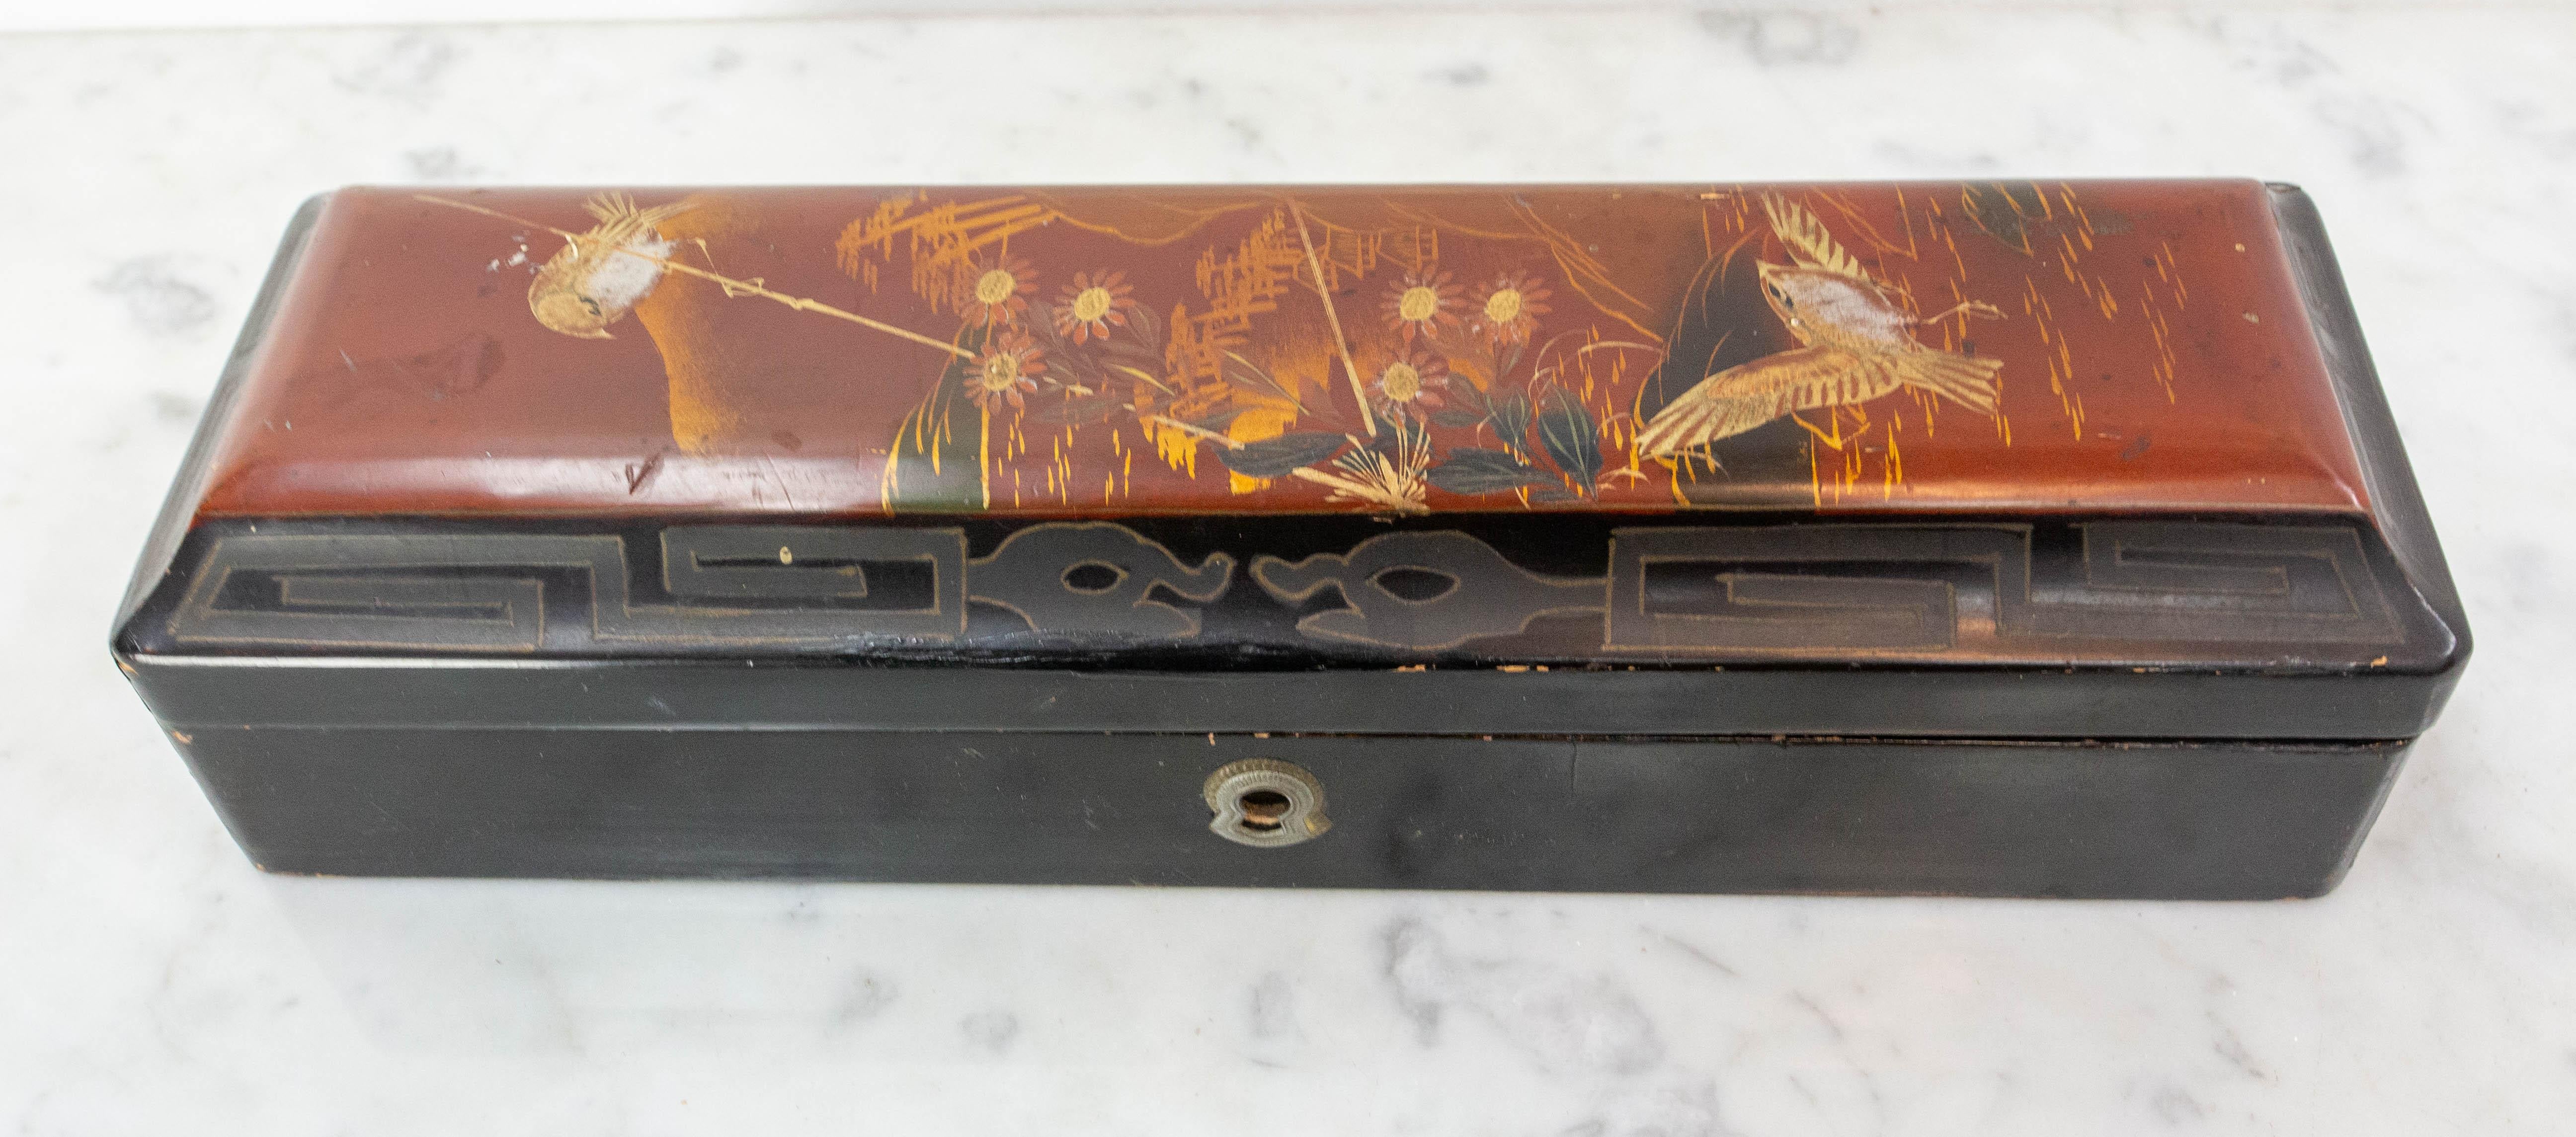 Lacquered paintbrush box, made in the chinese style.
In 19th-century Europe, oriental objects were highly prized and liked to be reproduced.
In this painting features two birds and vegetation in the foreground and an oriental landscape in the